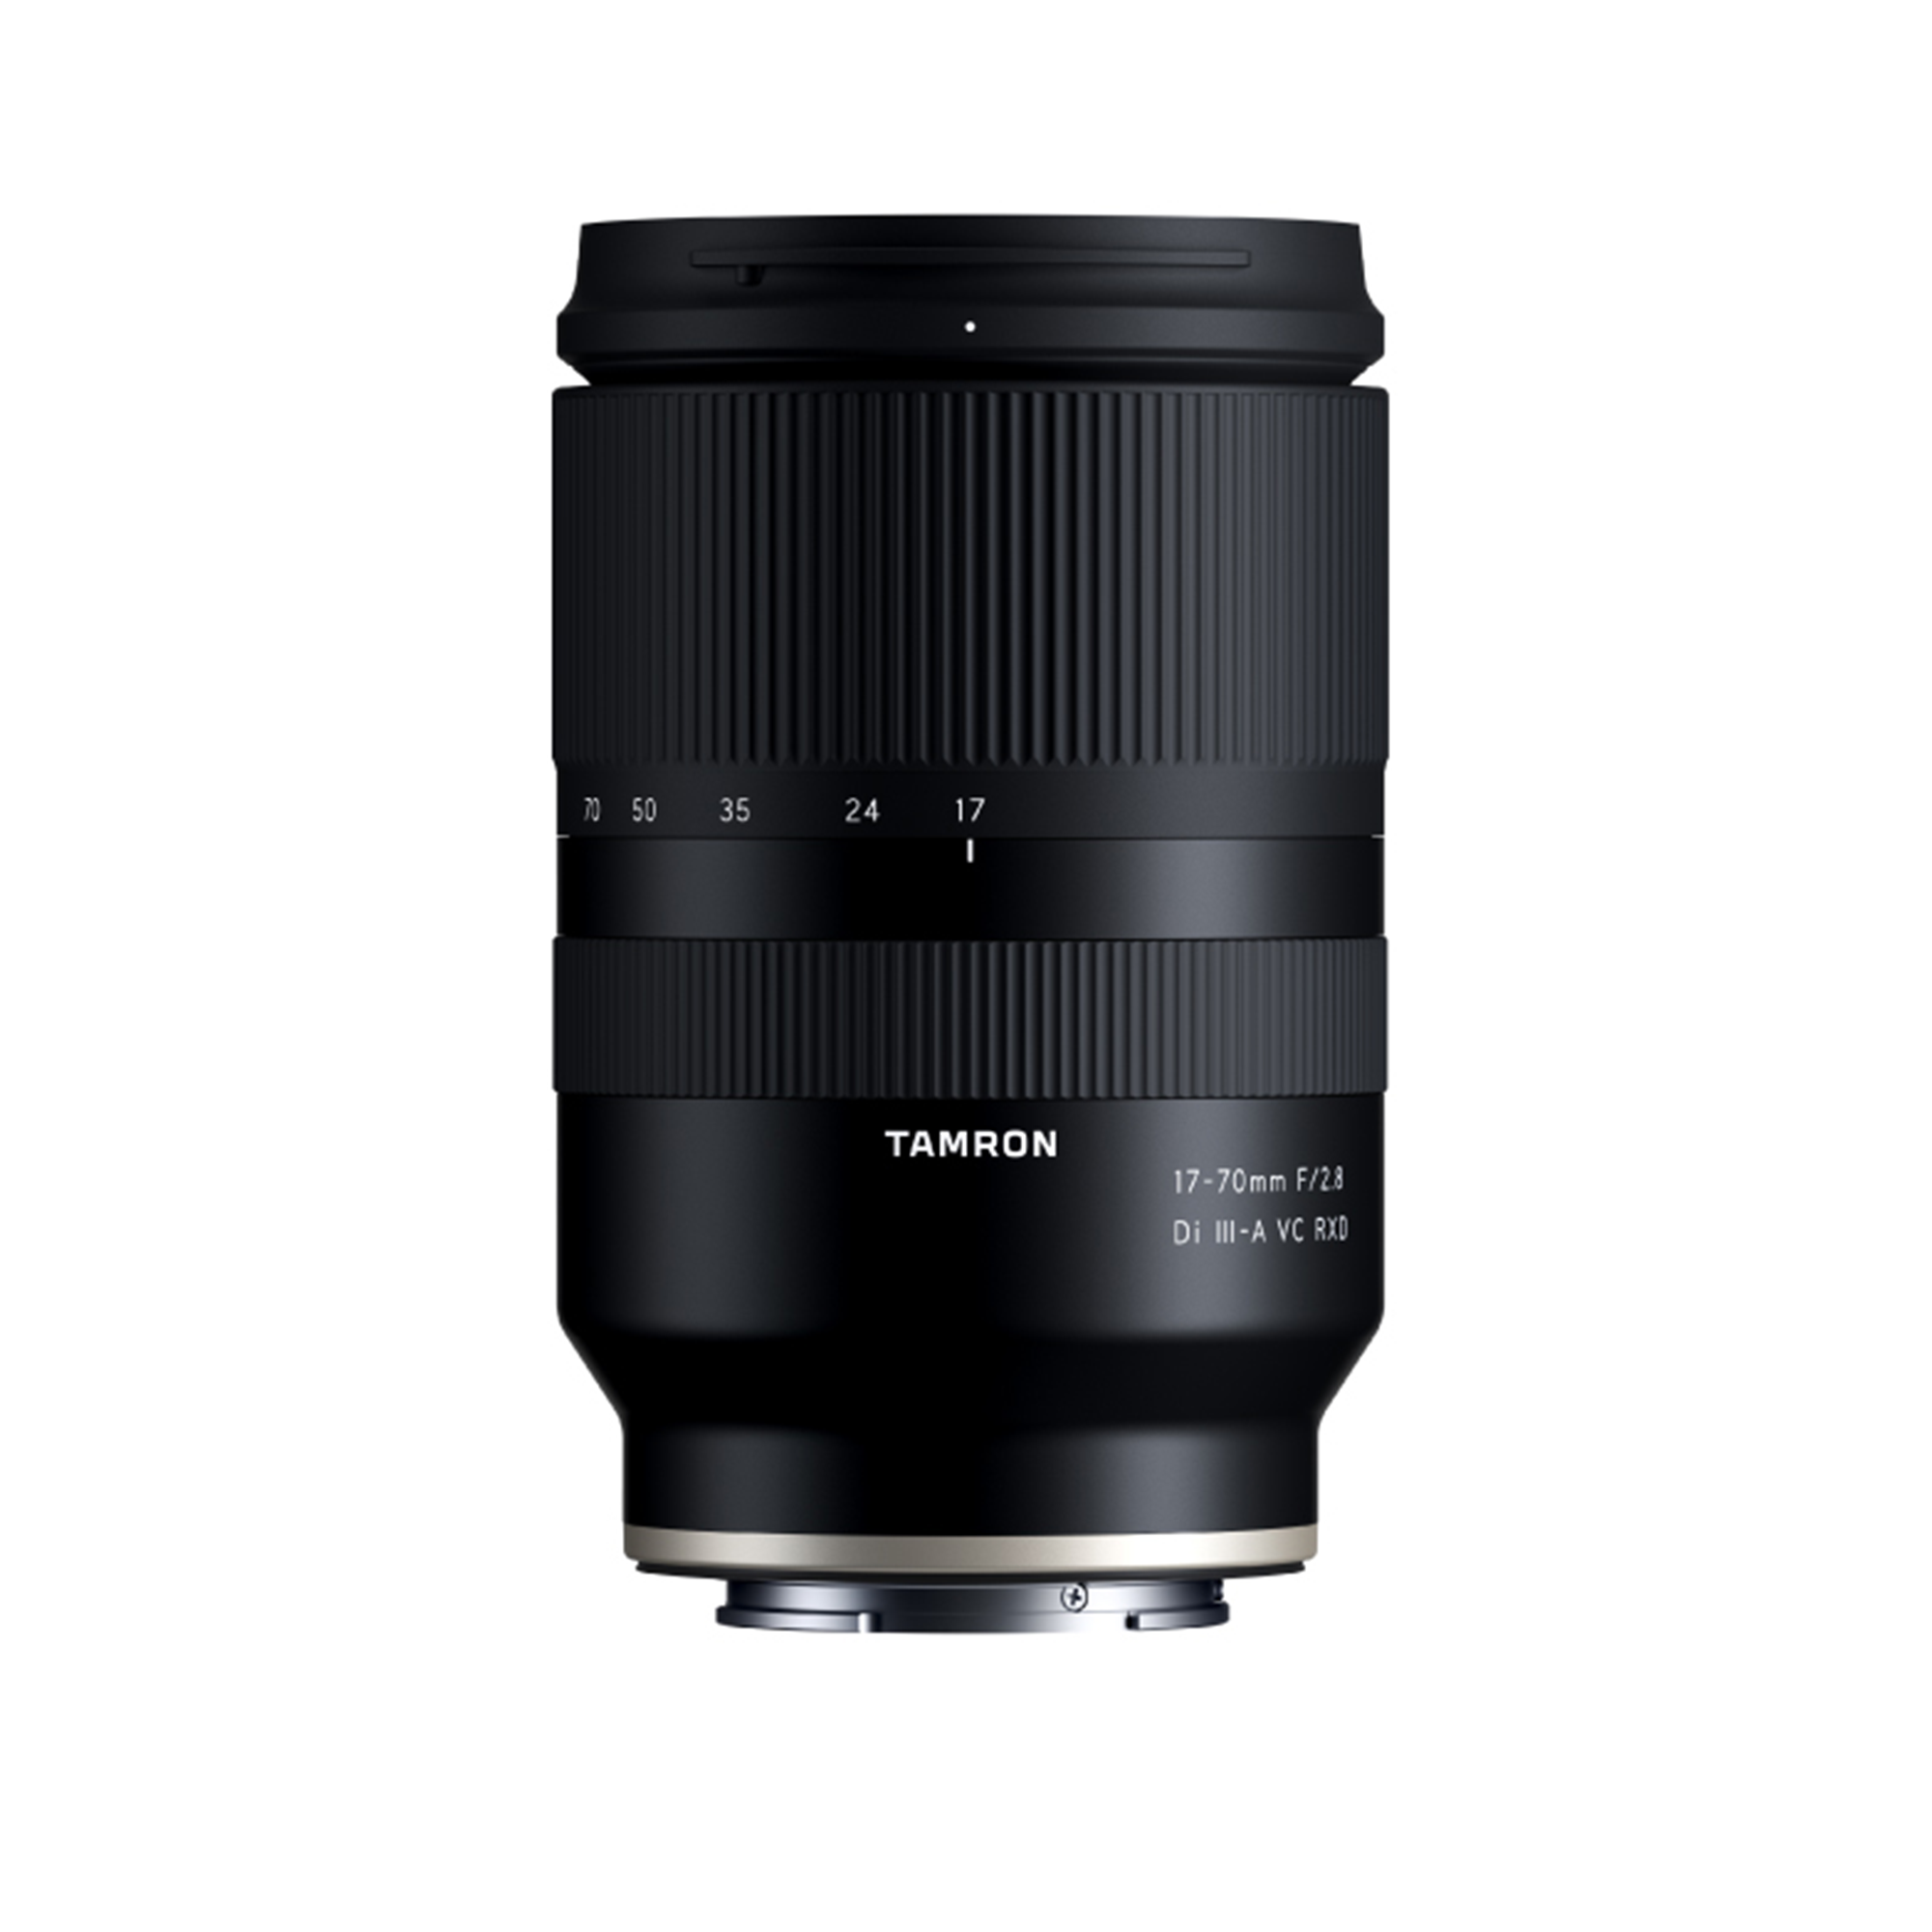 Tamron 17-70mm f/2.8 Di III-A VC RXD | Henry's